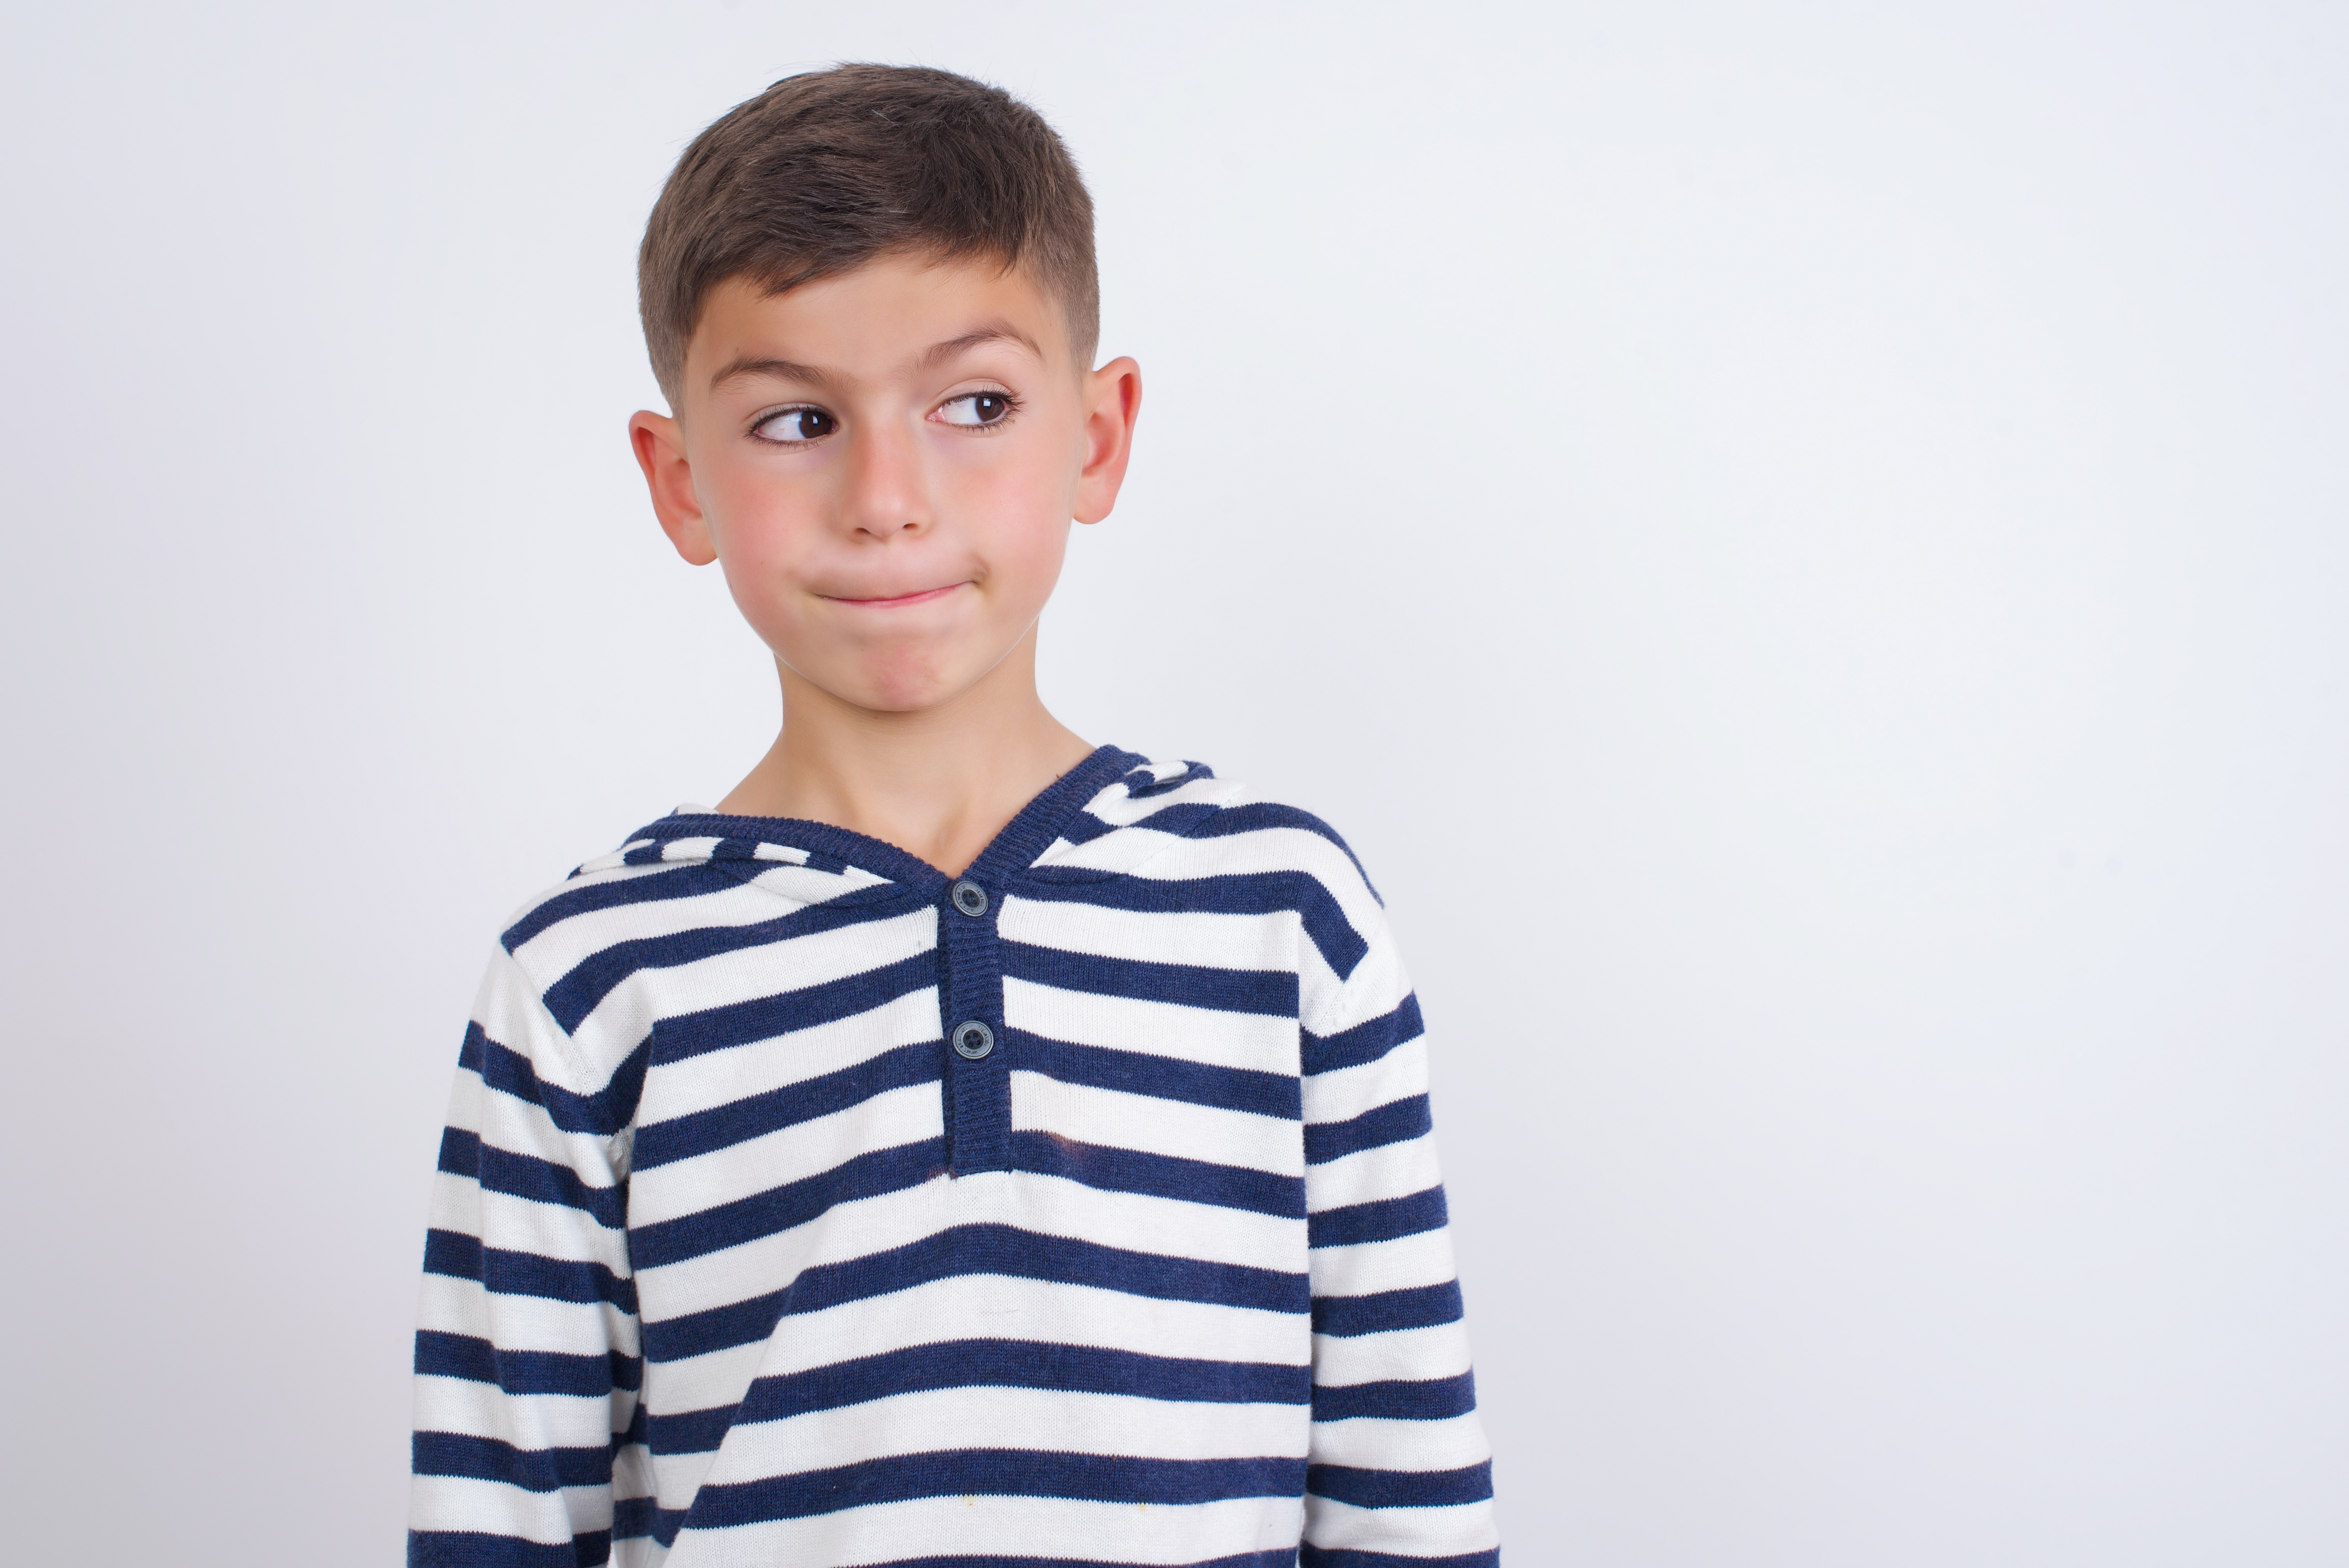 A confused young boy | Source: Shutterstock